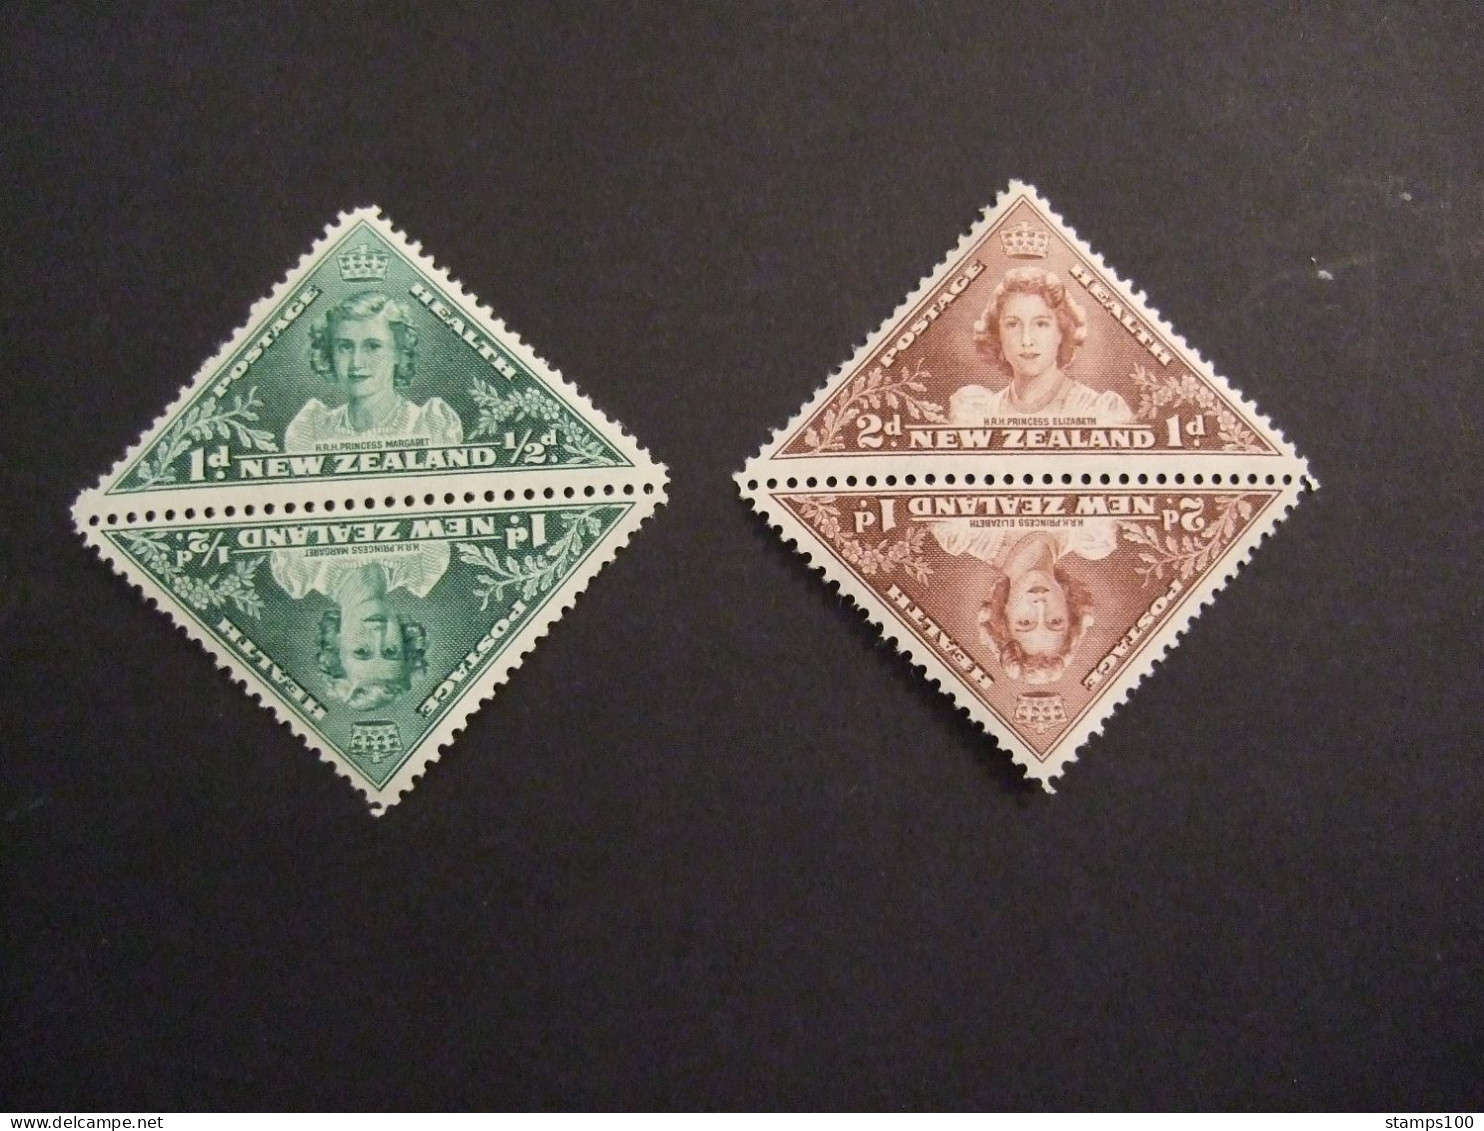 NEW ZEALAND - 1943 HEALTH STAMPS SET MINT NH** SG 636/37  (A13-TVN-01) - Unused Stamps